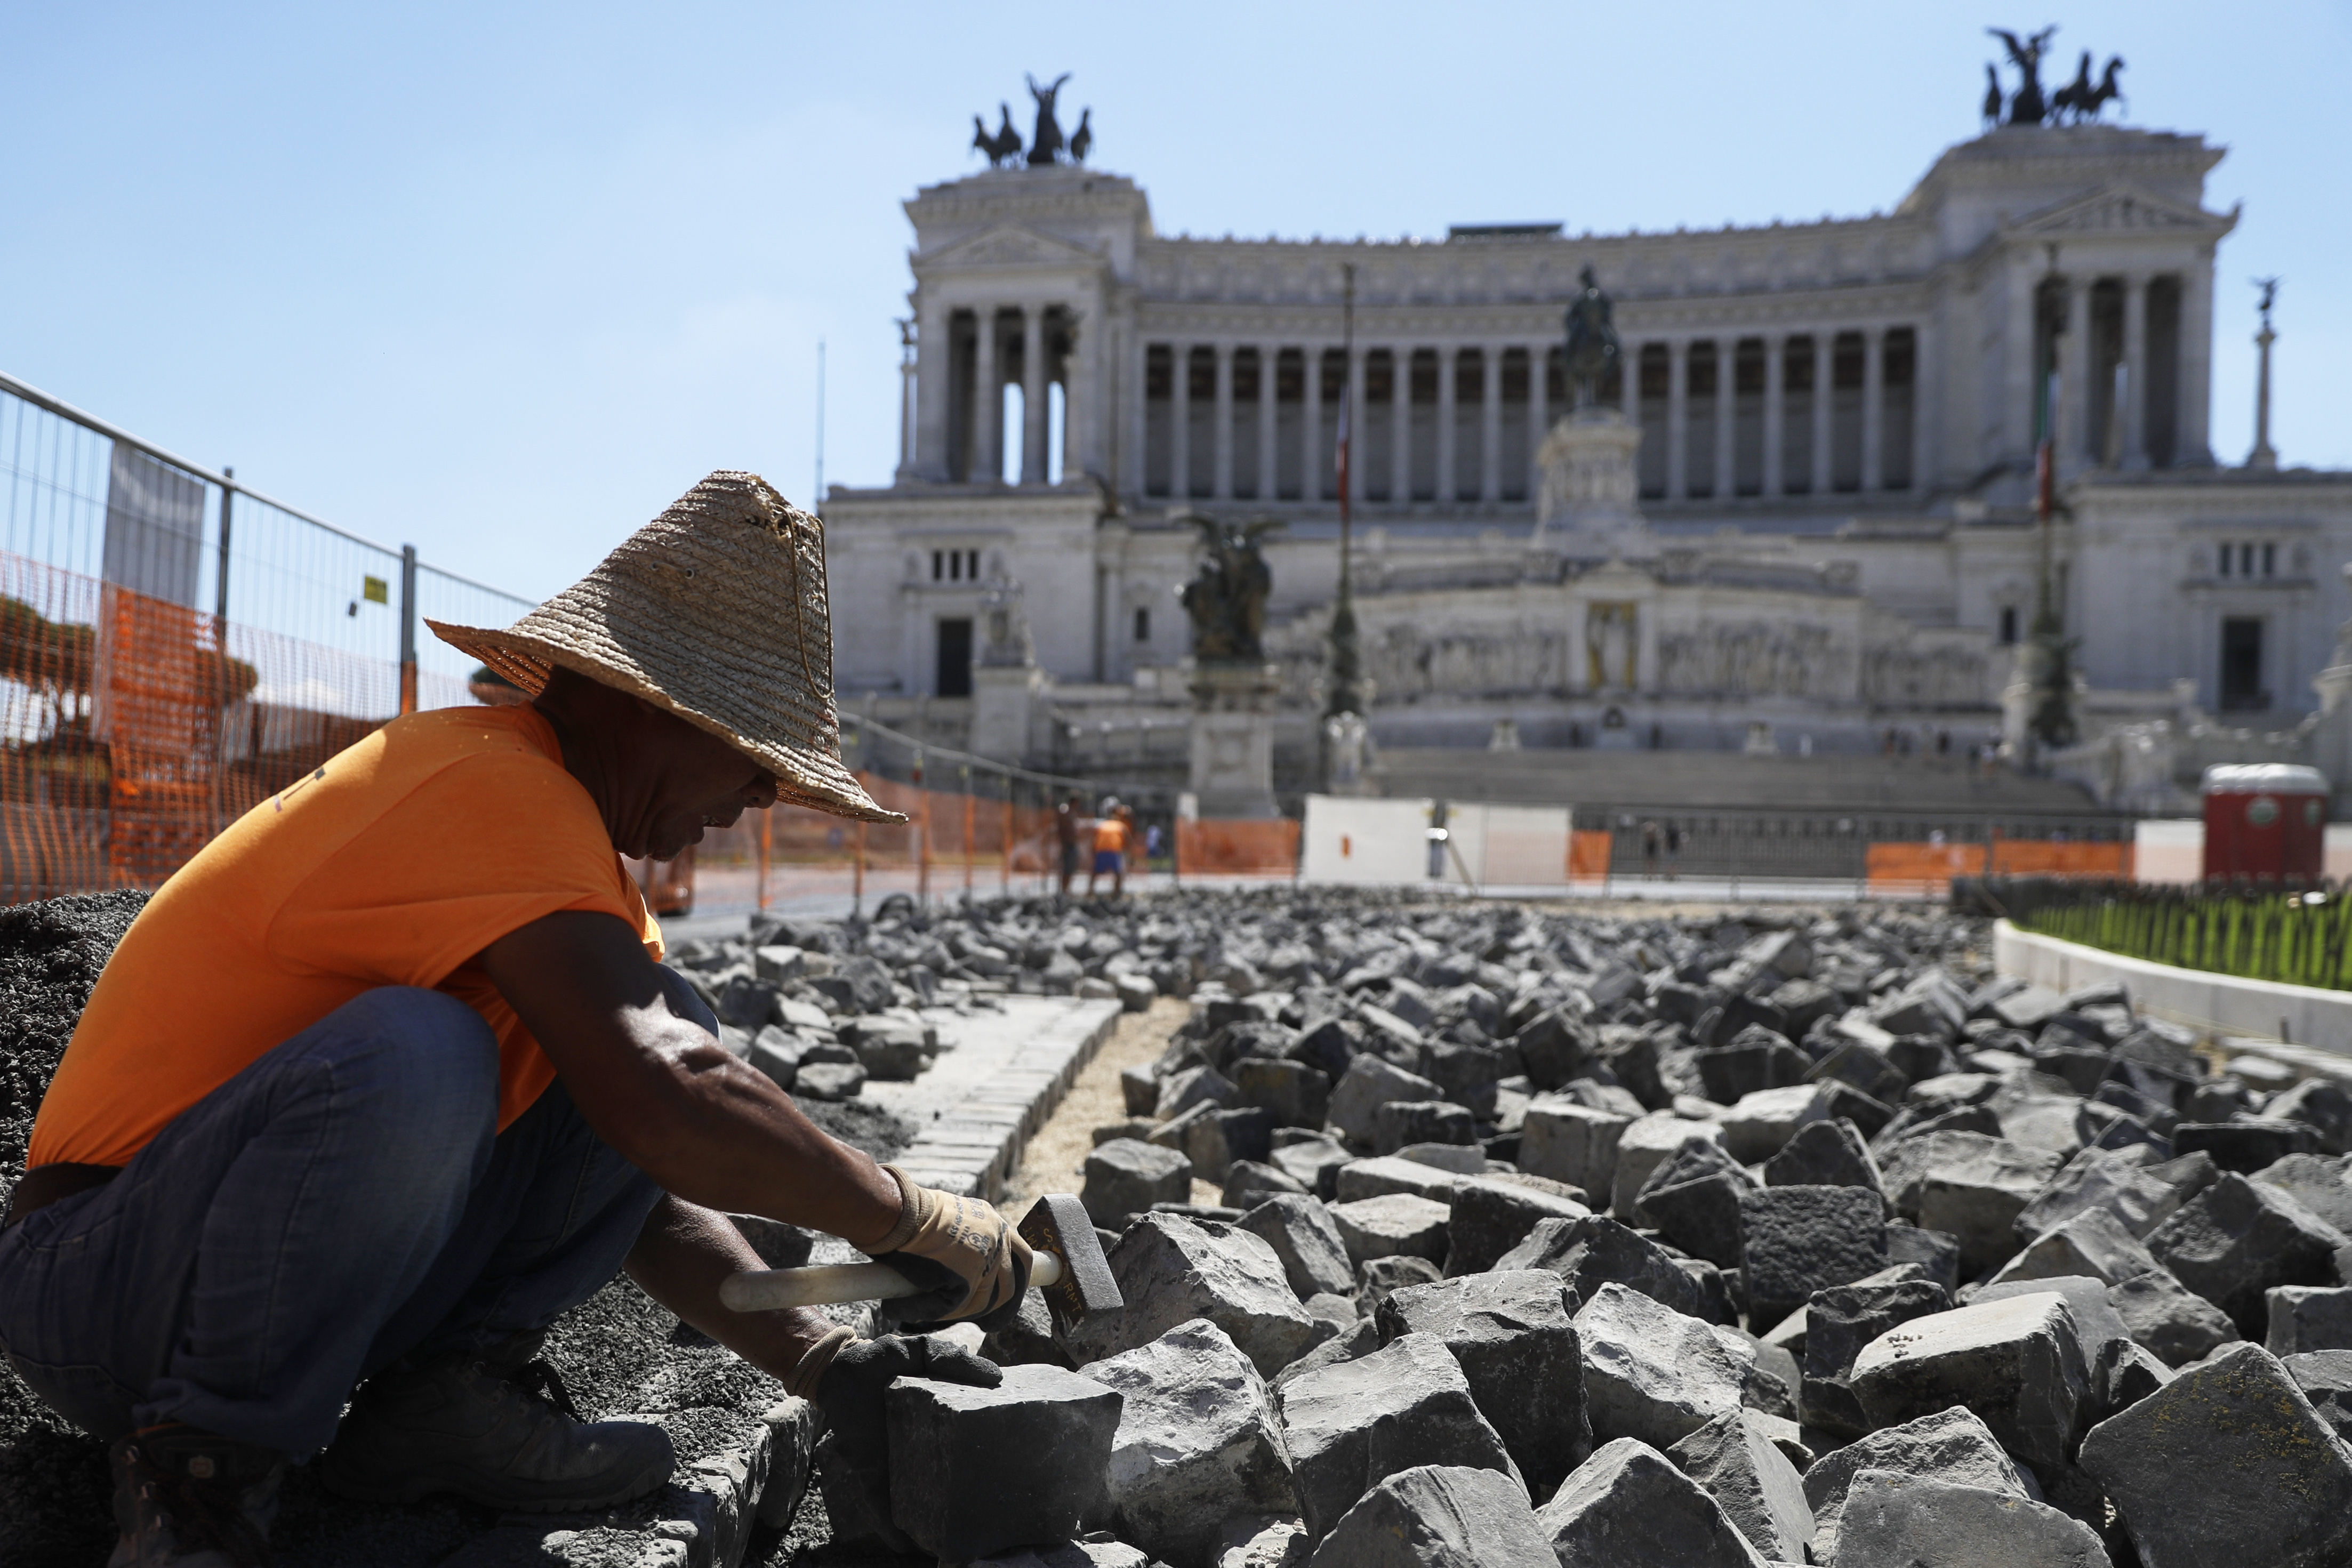 Construction worker Hu Shaoguang, of China, works on the remaking of the road surface with cobble stones in the central Venice Square in front of the Unknown Soldier monument in Rome, Monday, Sept. 7, 2020. (AP Photo/Gregorio Borgia)